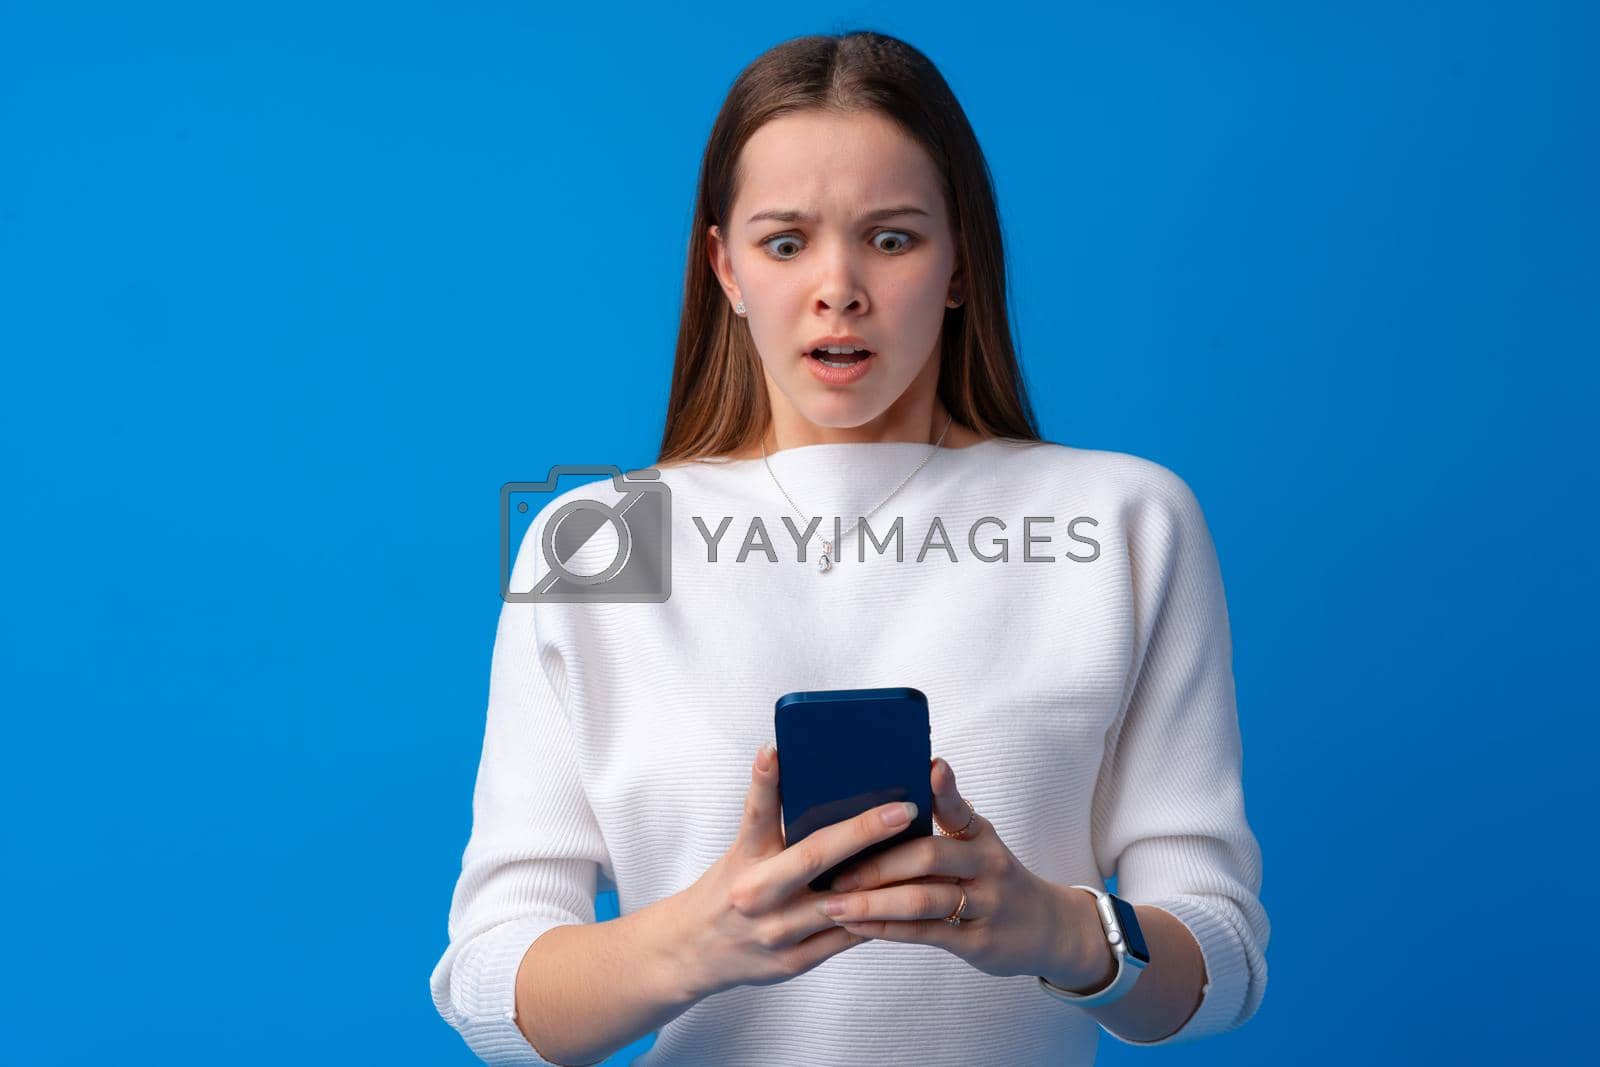 Royalty free image of Portrait of a teen young girl using smartphone over blue background by Fabrikasimf